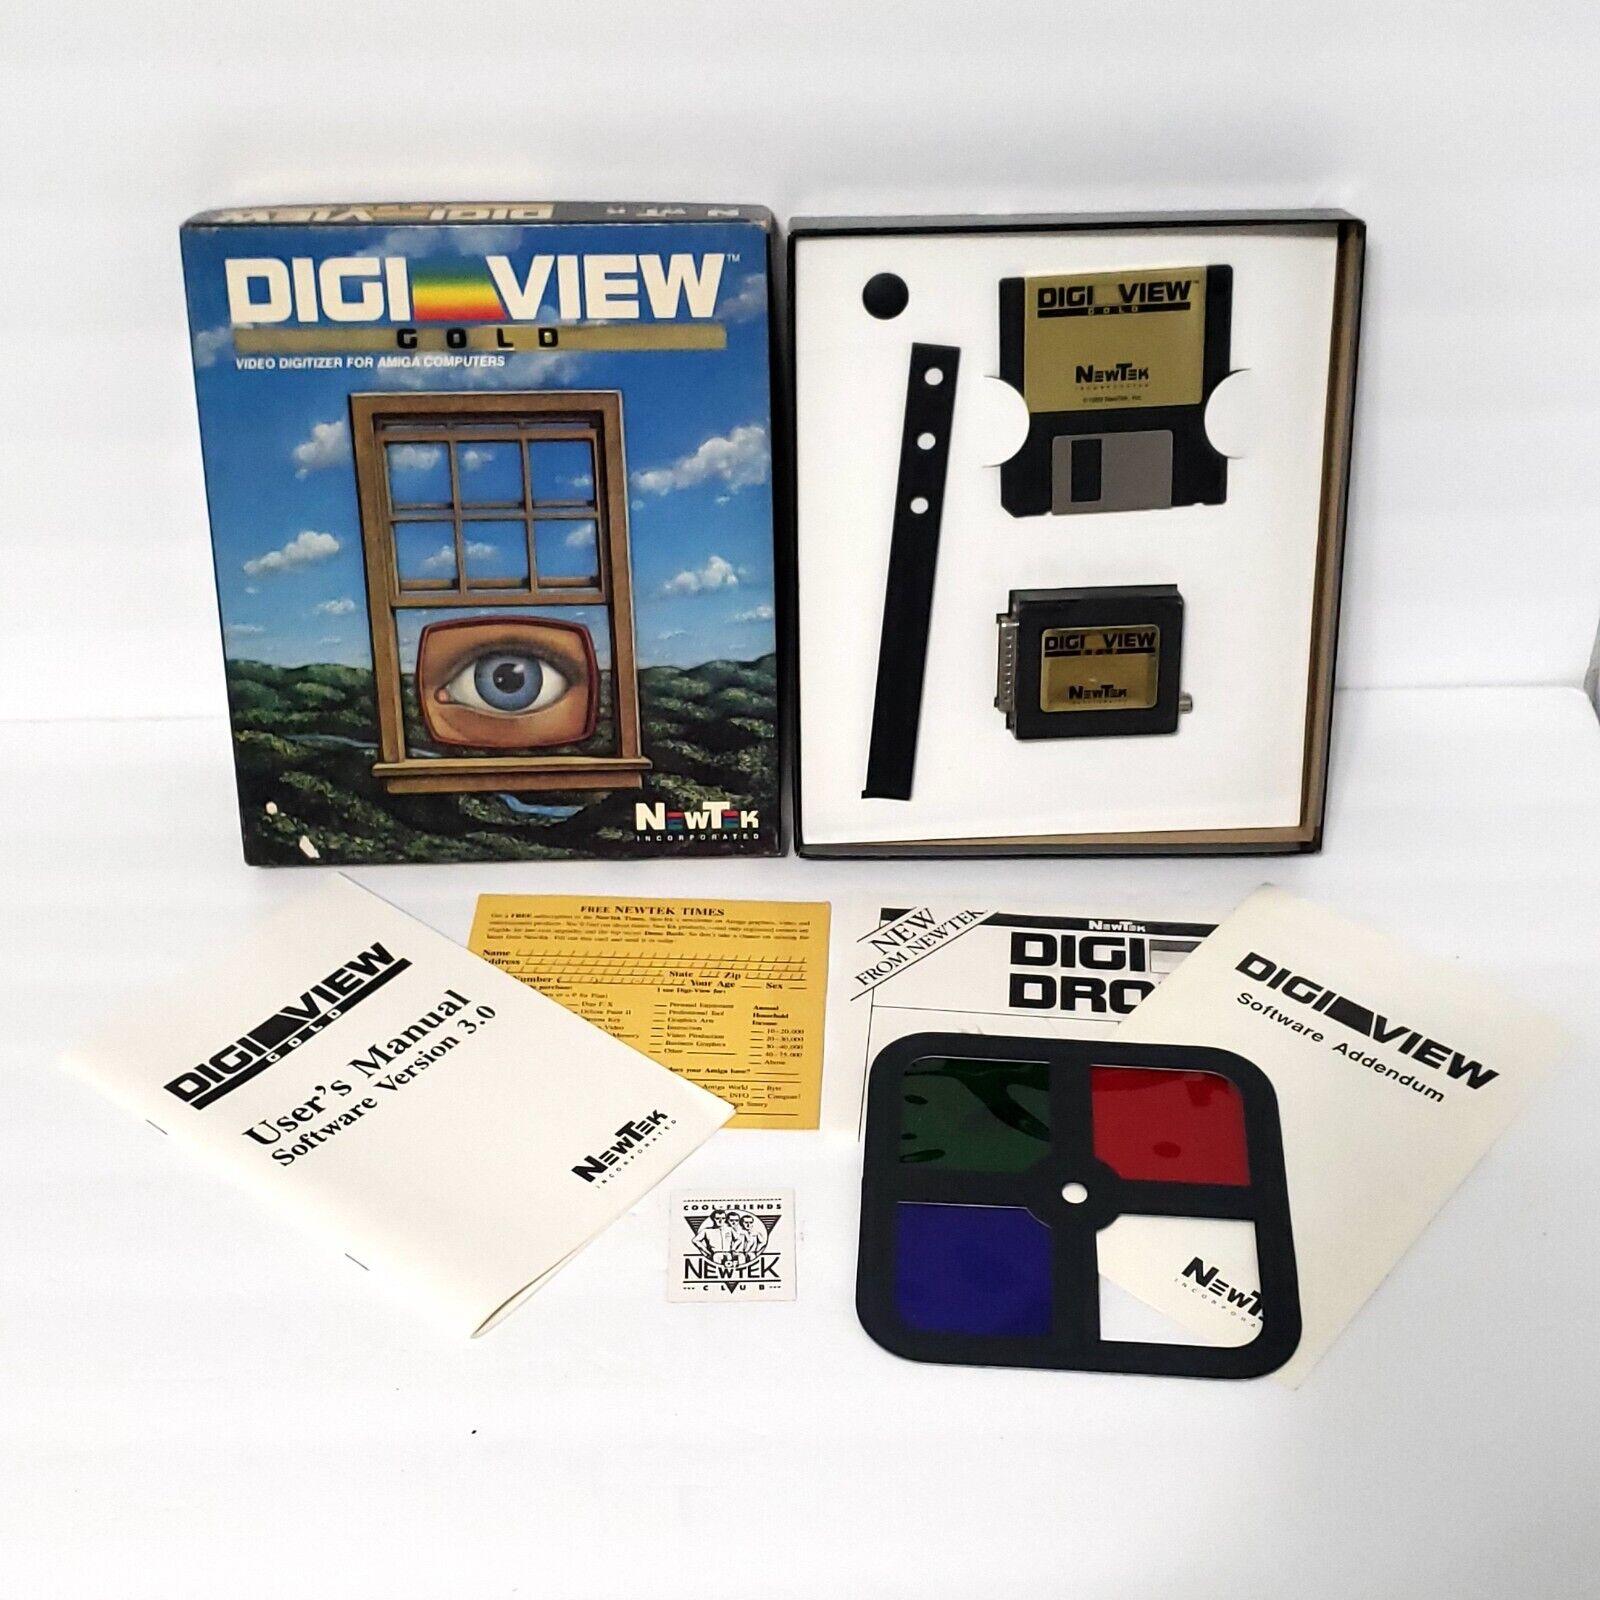 Digi View Gold NewTek Color Digitizer for Commodore Amiga w/ Software AS IS